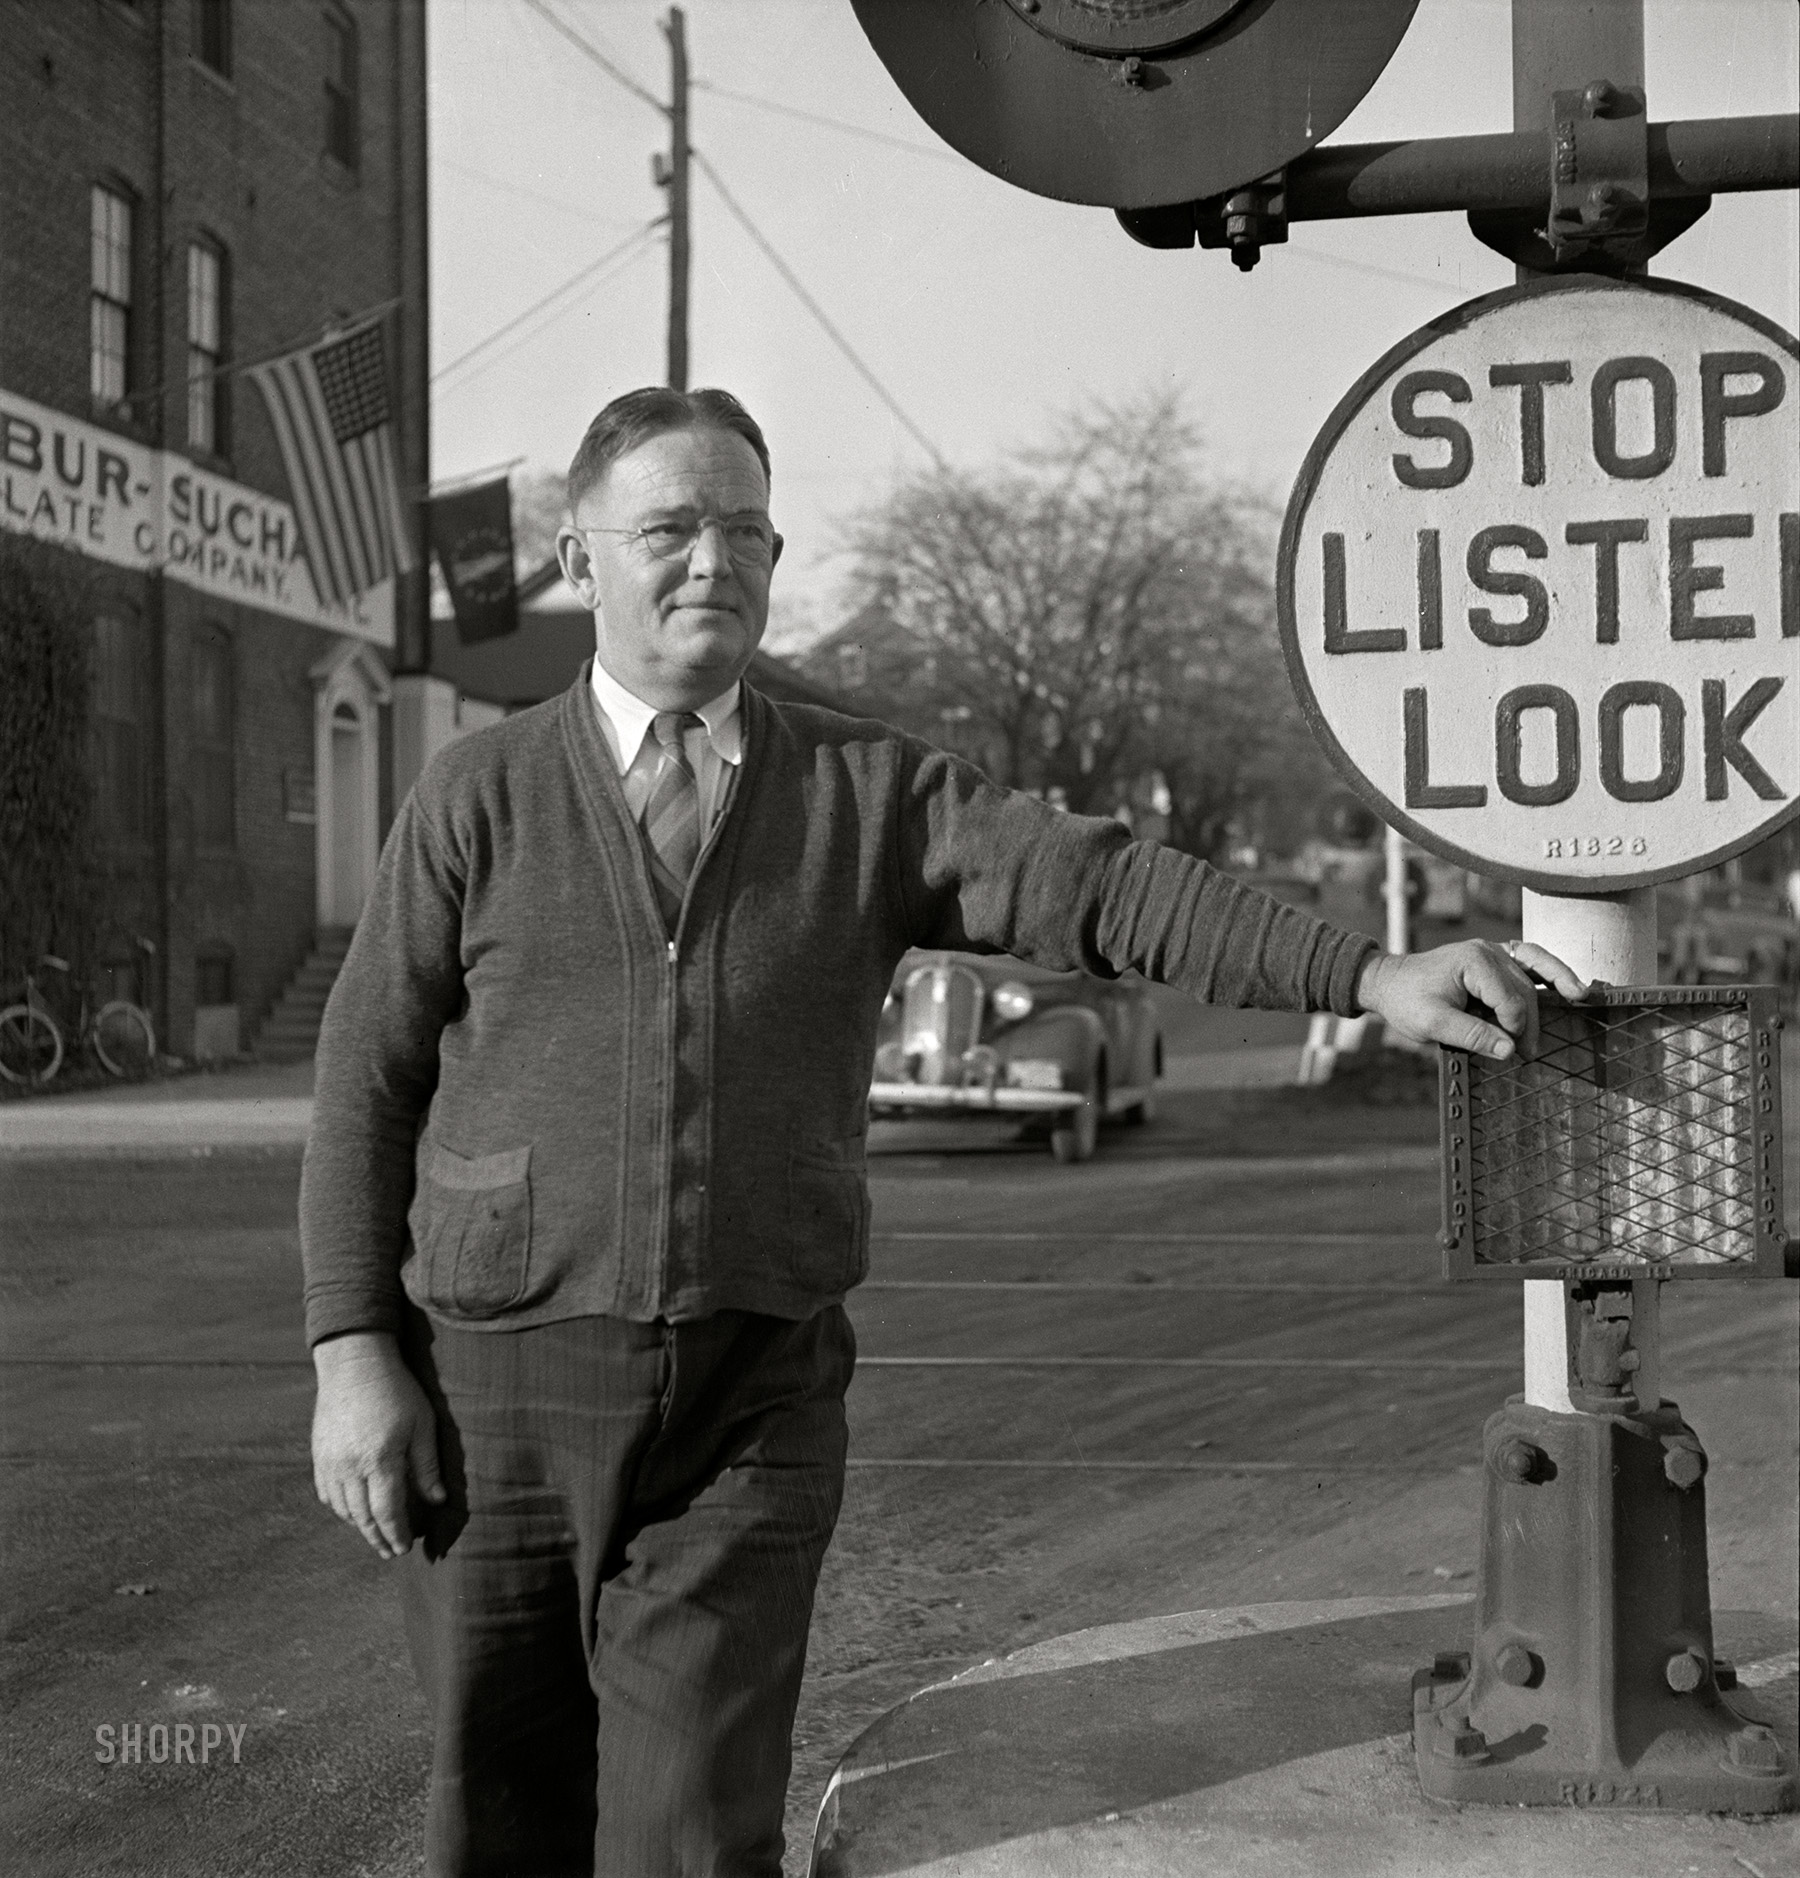 November 1942. Lititz, Pennsylvania. "Mr. O.K. Bushong, express agent. Two trains a day pass through Lititz on the Lancaster-Reading Railroad. He says that passenger trade has increased 100 percent since war." Photo by Marjory Collins, Office of War Information. View full size.